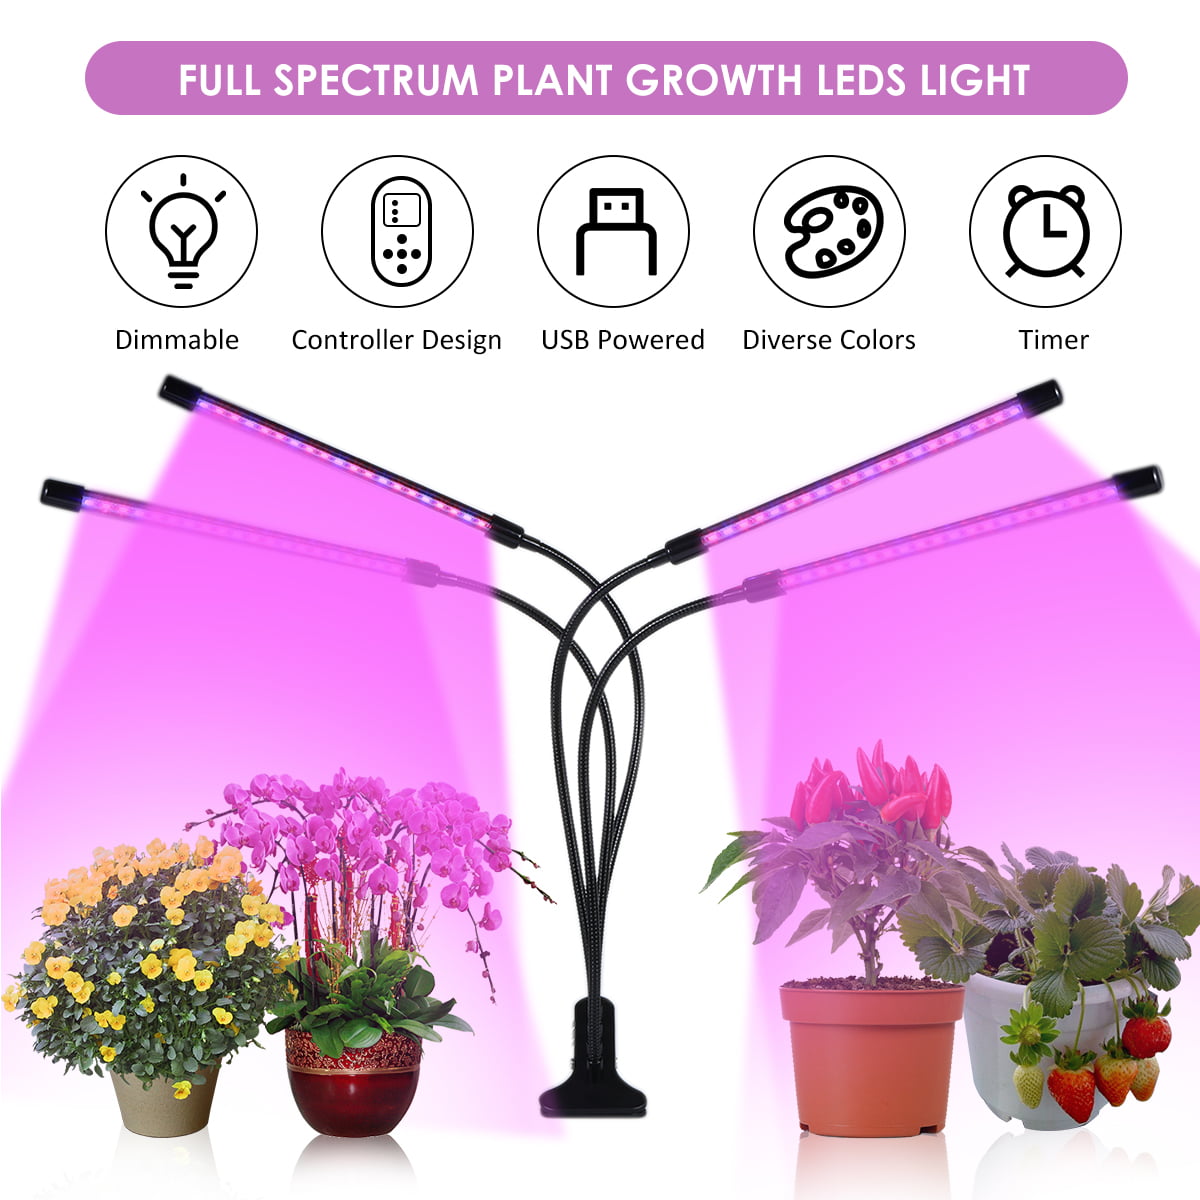 VIPARSPECTRA Timer Control Dimmable 300W LED Grow Light for Indoor Plants 